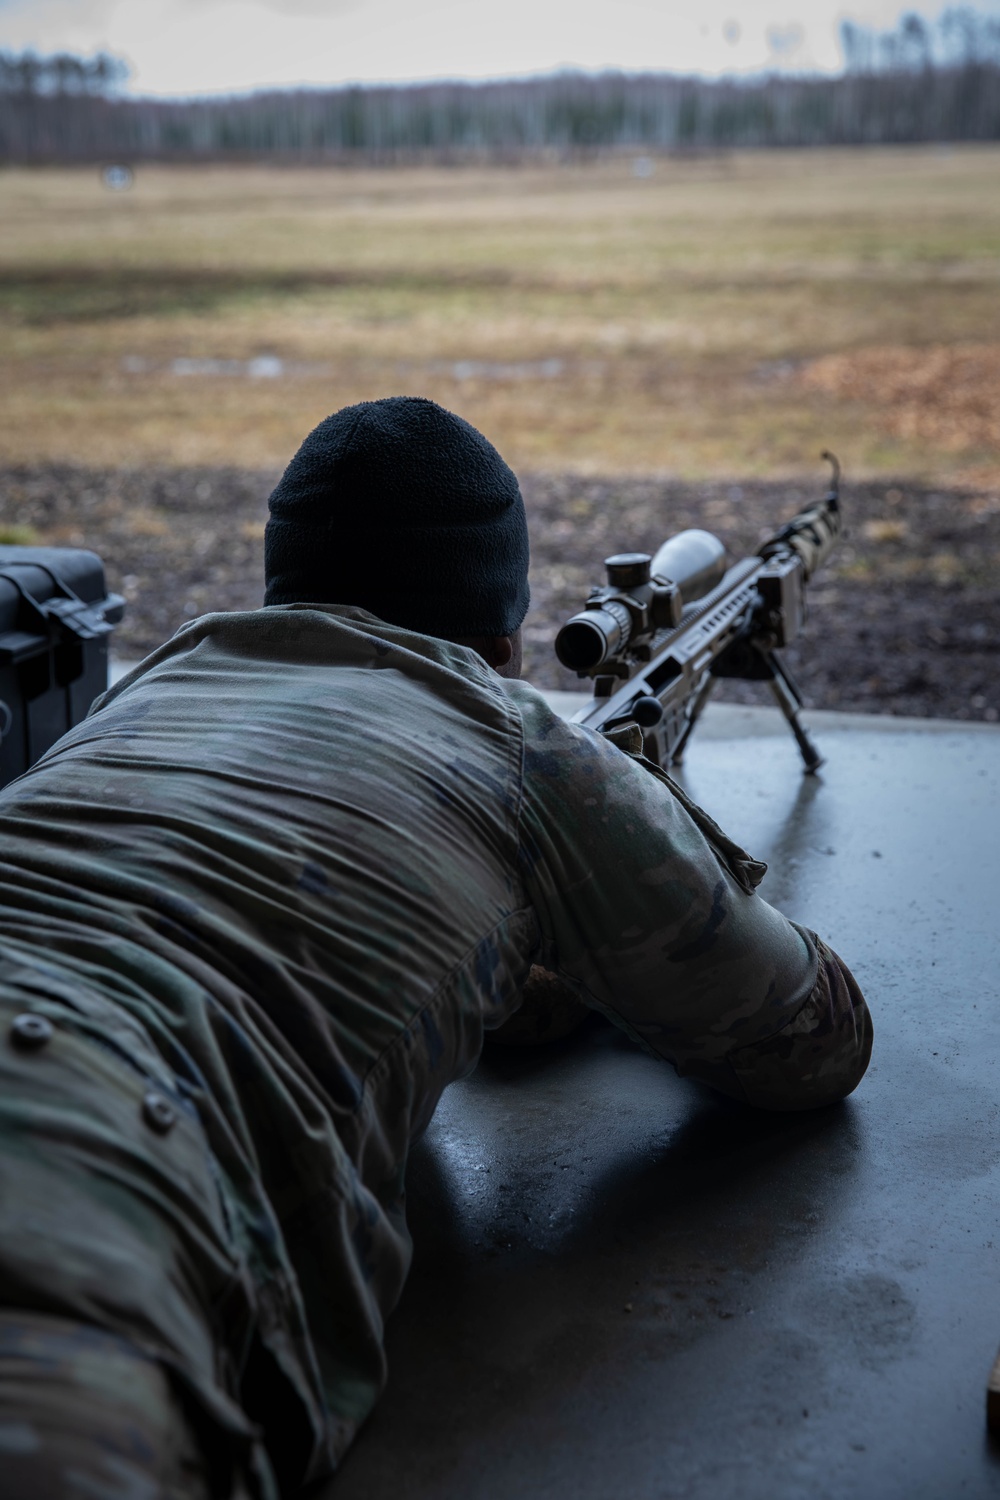 1st Bn., 187th IN participates in an international sniper competition